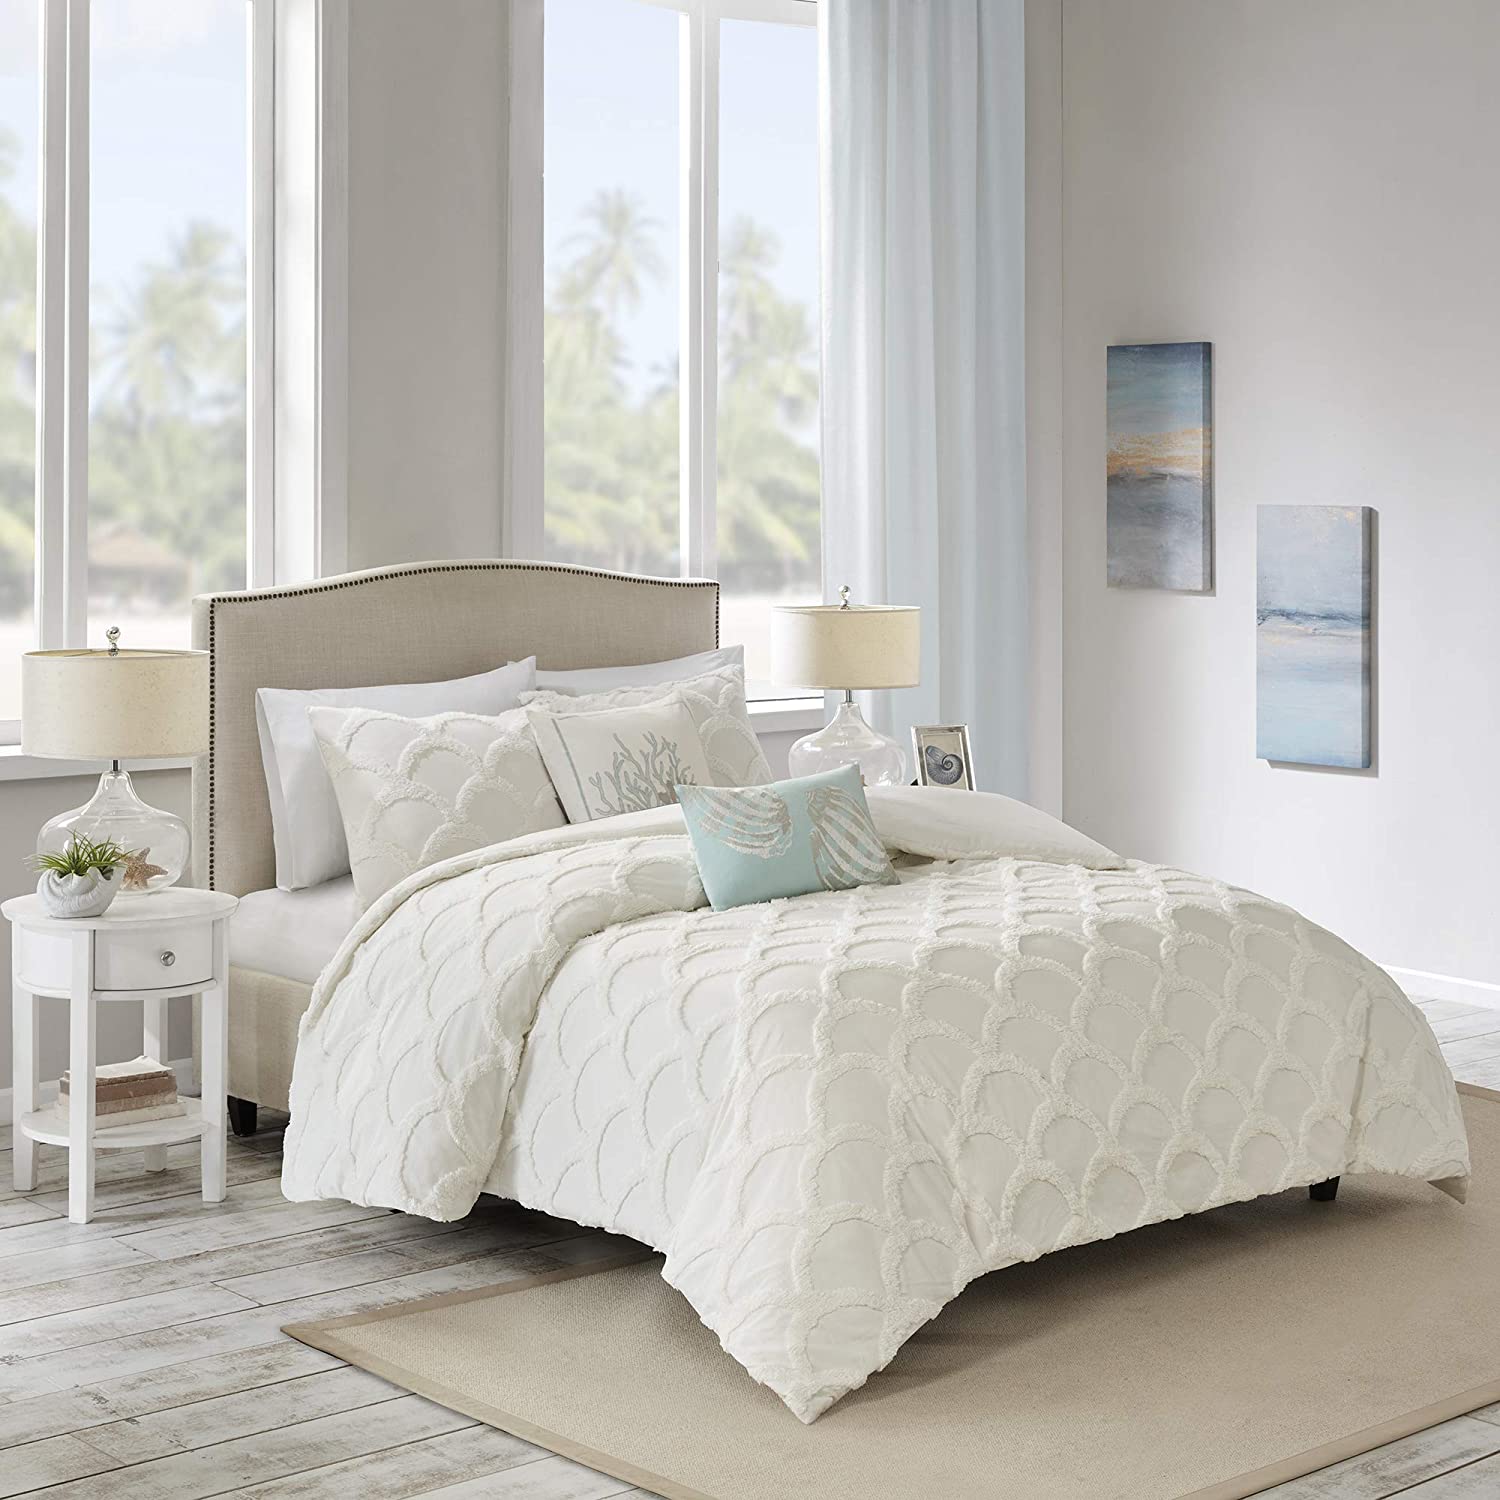 Harbor House Cannon Beach Duvet Cover Full/Queen Size - Ivory , Mermaid Scale Tufted Chenille Duvet Cover Set ‚Äì 3 Piece ‚Äì 100% Cotton Light Weight Bed Comforter Covers